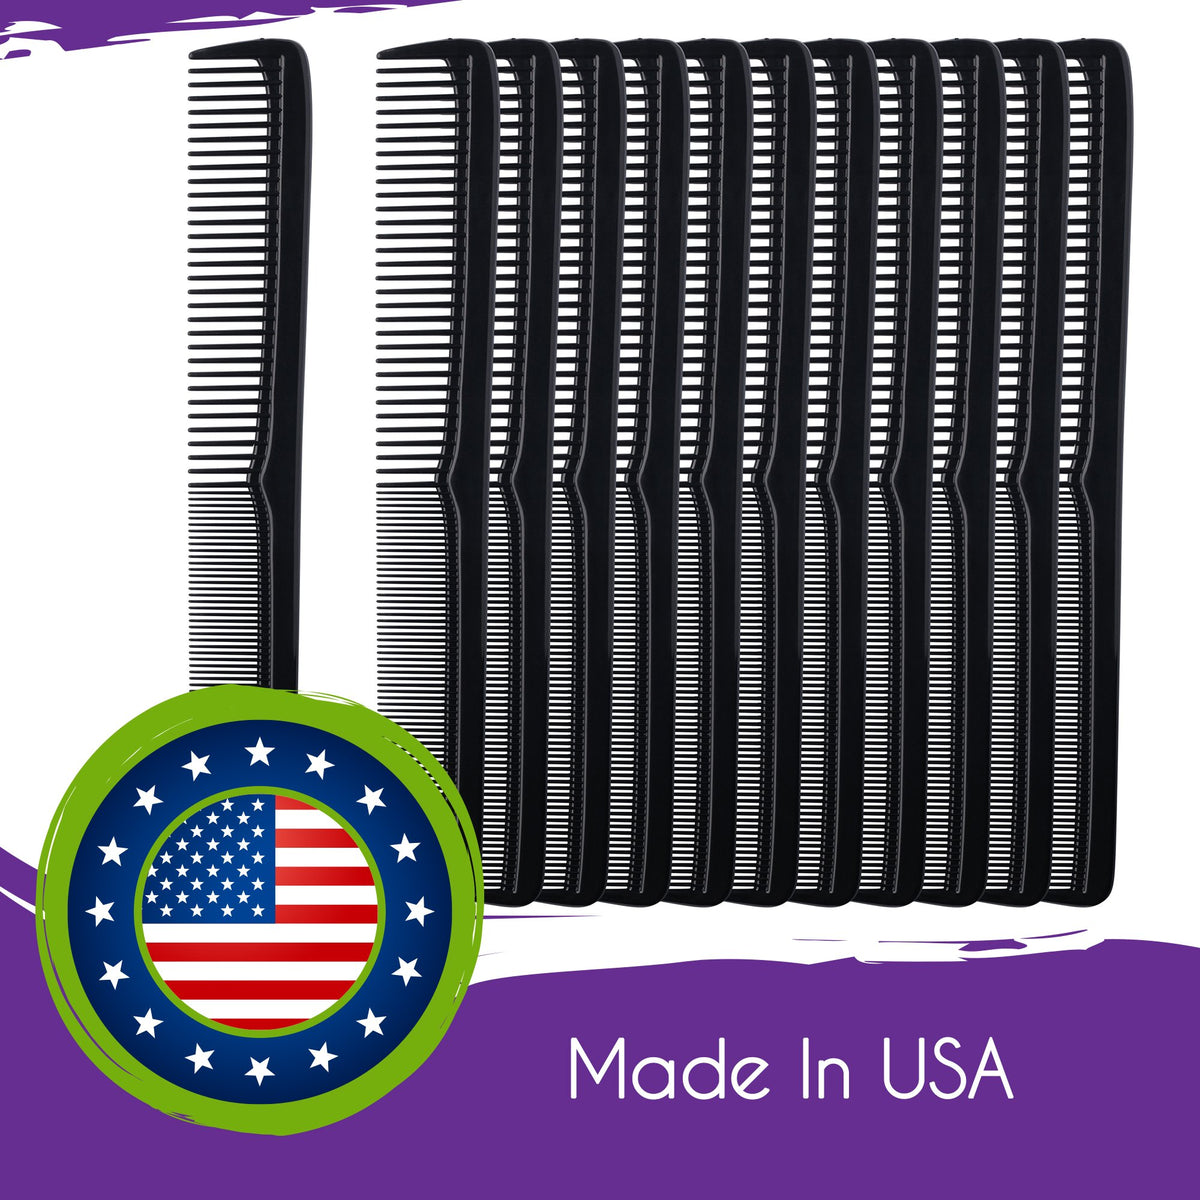 Mars Wellness 7” Hair Styling Comb (Bulk Pack of 24) - Plastic Comb for Men & Women - Black Comb Set - Heat Resistant Comb for All Hair Types - Hair Comb for Salon, Barbershops, Home - Made in USA